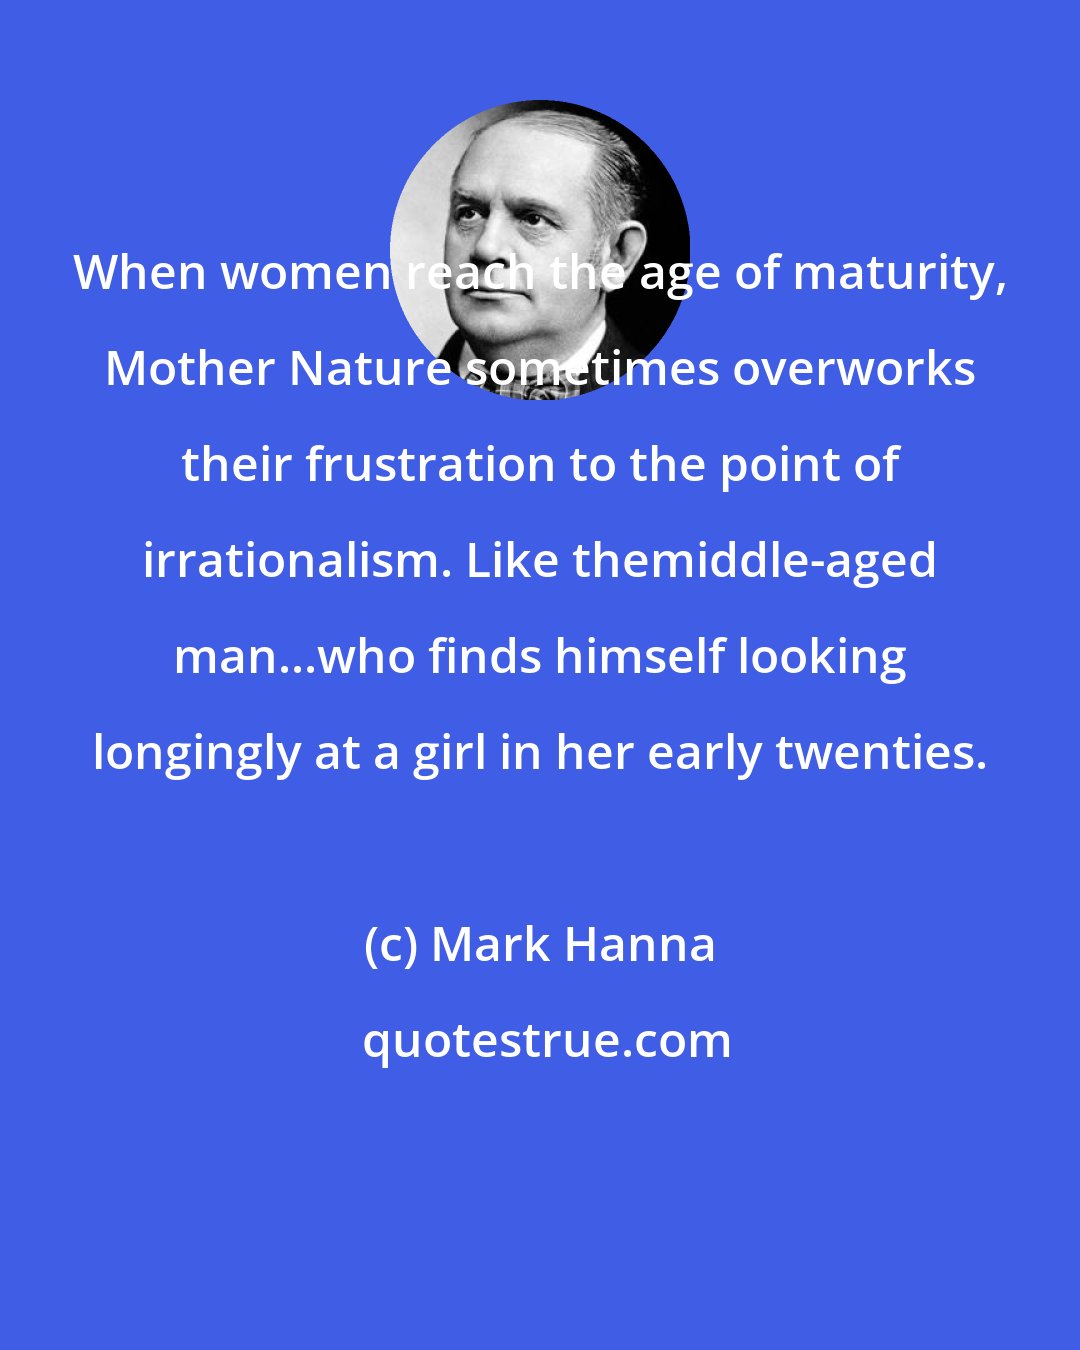 Mark Hanna: When women reach the age of maturity, Mother Nature sometimes overworks their frustration to the point of irrationalism. Like themiddle-aged man...who finds himself looking longingly at a girl in her early twenties.